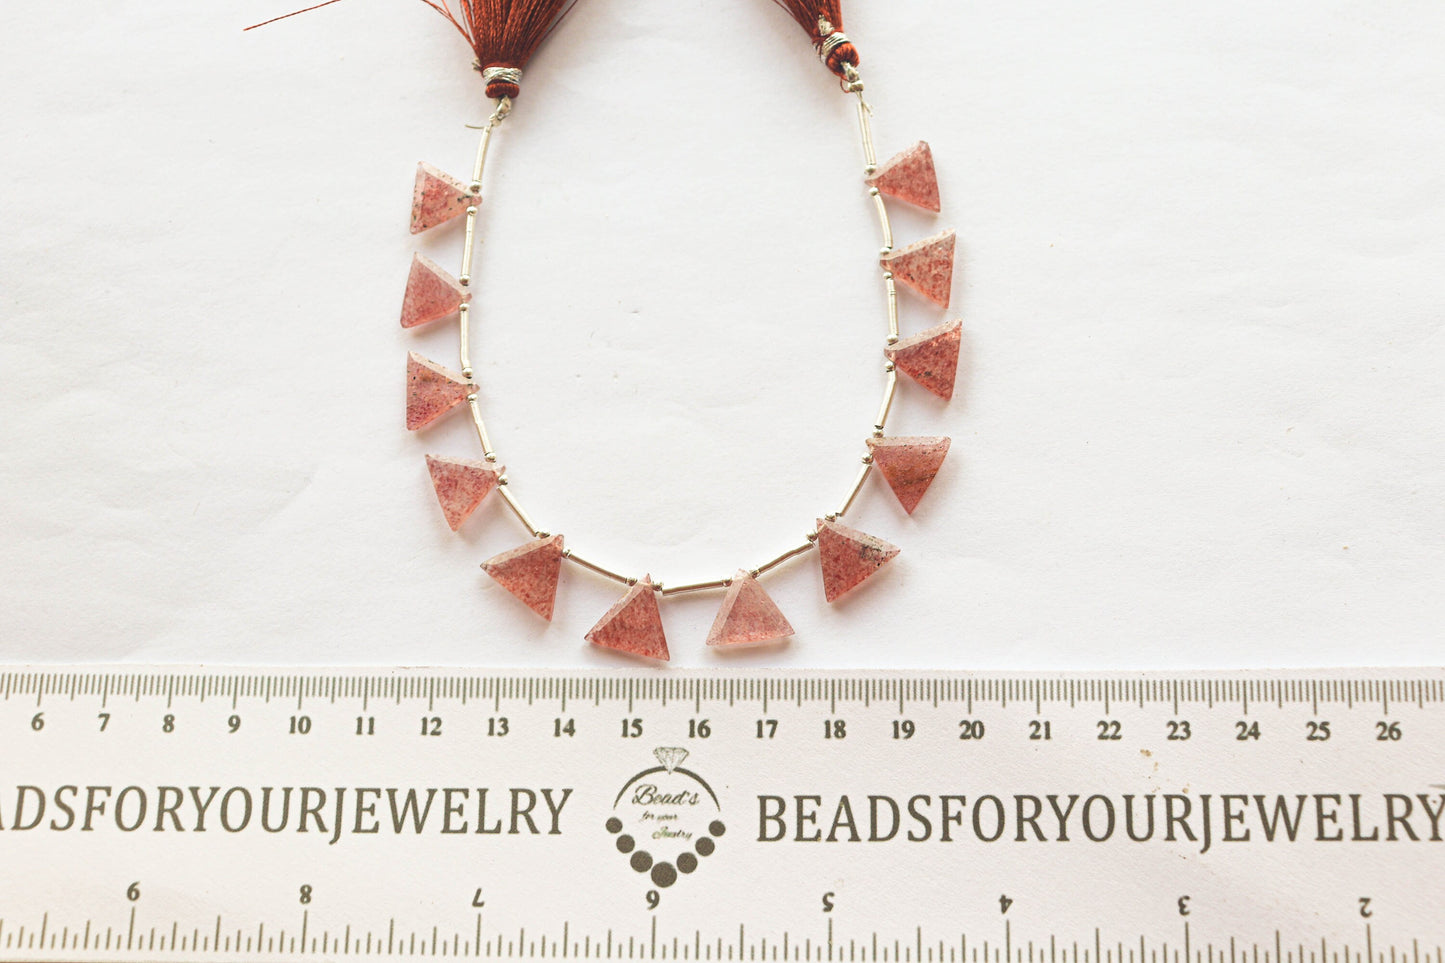 Pink Strawberry Quartz Triangle Shape Faceted Beads, 13x13mm,  12 Pieces, Natural Strawberry Quartz, Beadsforyourjewellery